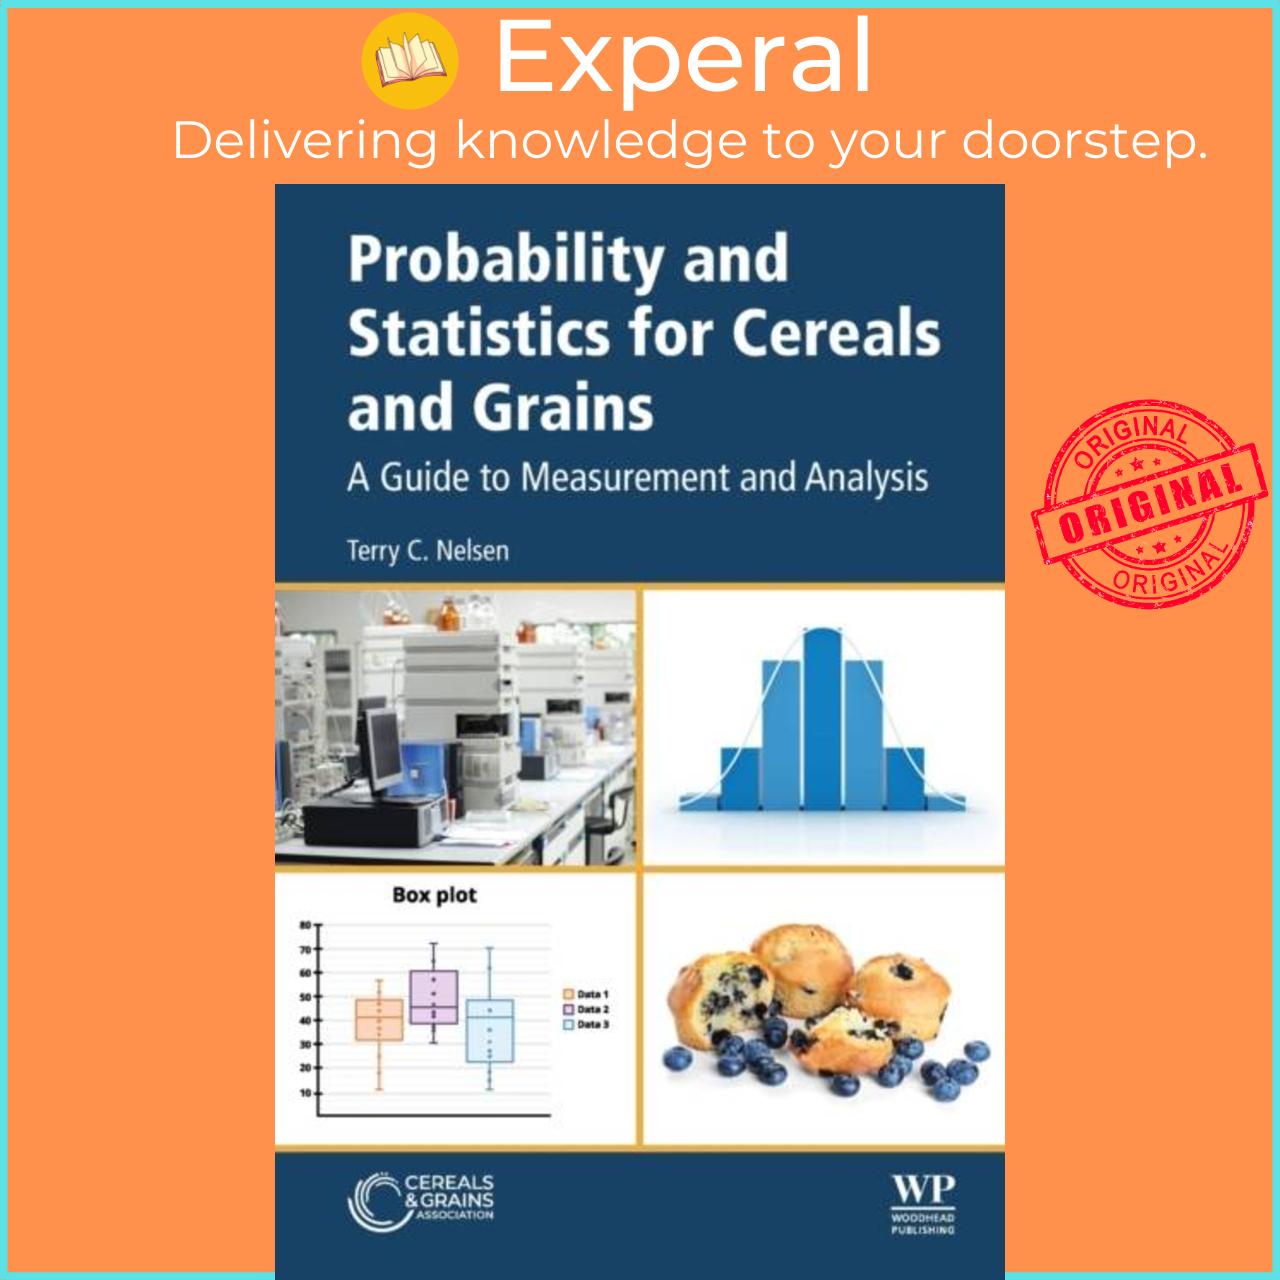 Sách - Probability and Statistics for Cereals and Grains - A Guide to Measurem by Terry C Nelsen (UK edition, paperback)